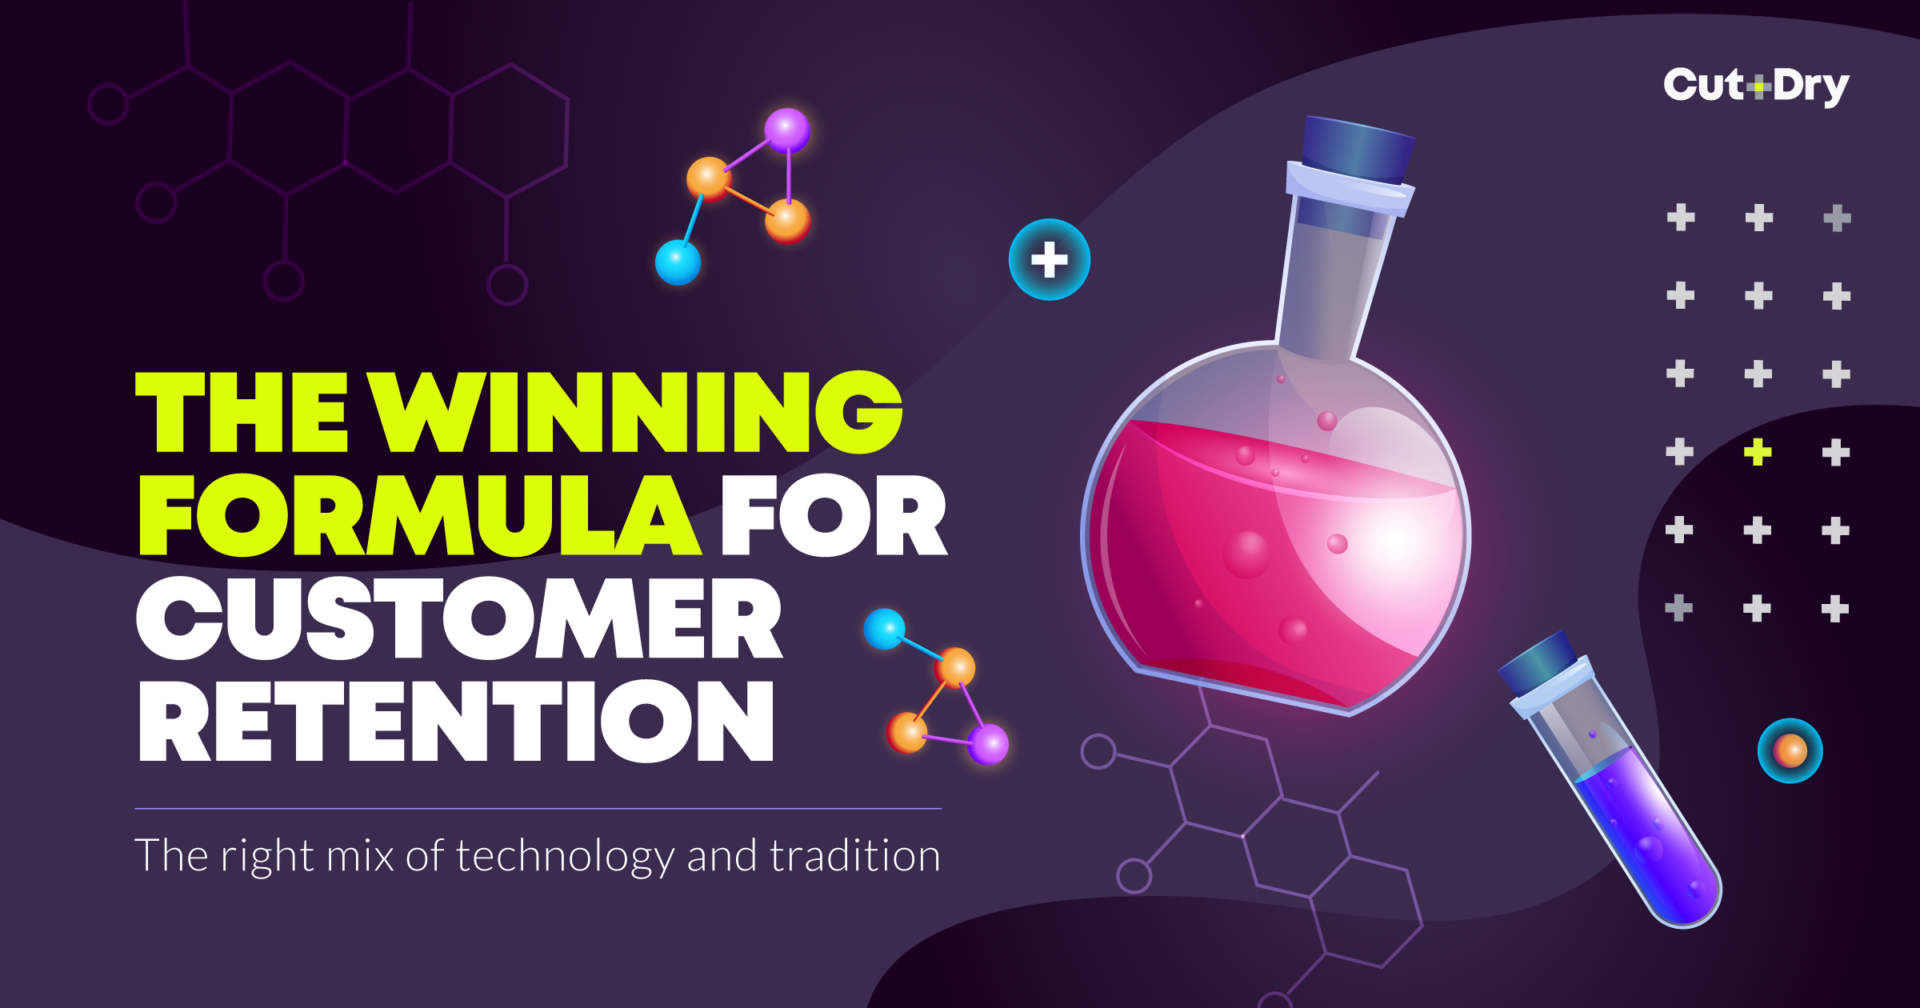 The winning formula for customer retention: The right mix of technology and tradition